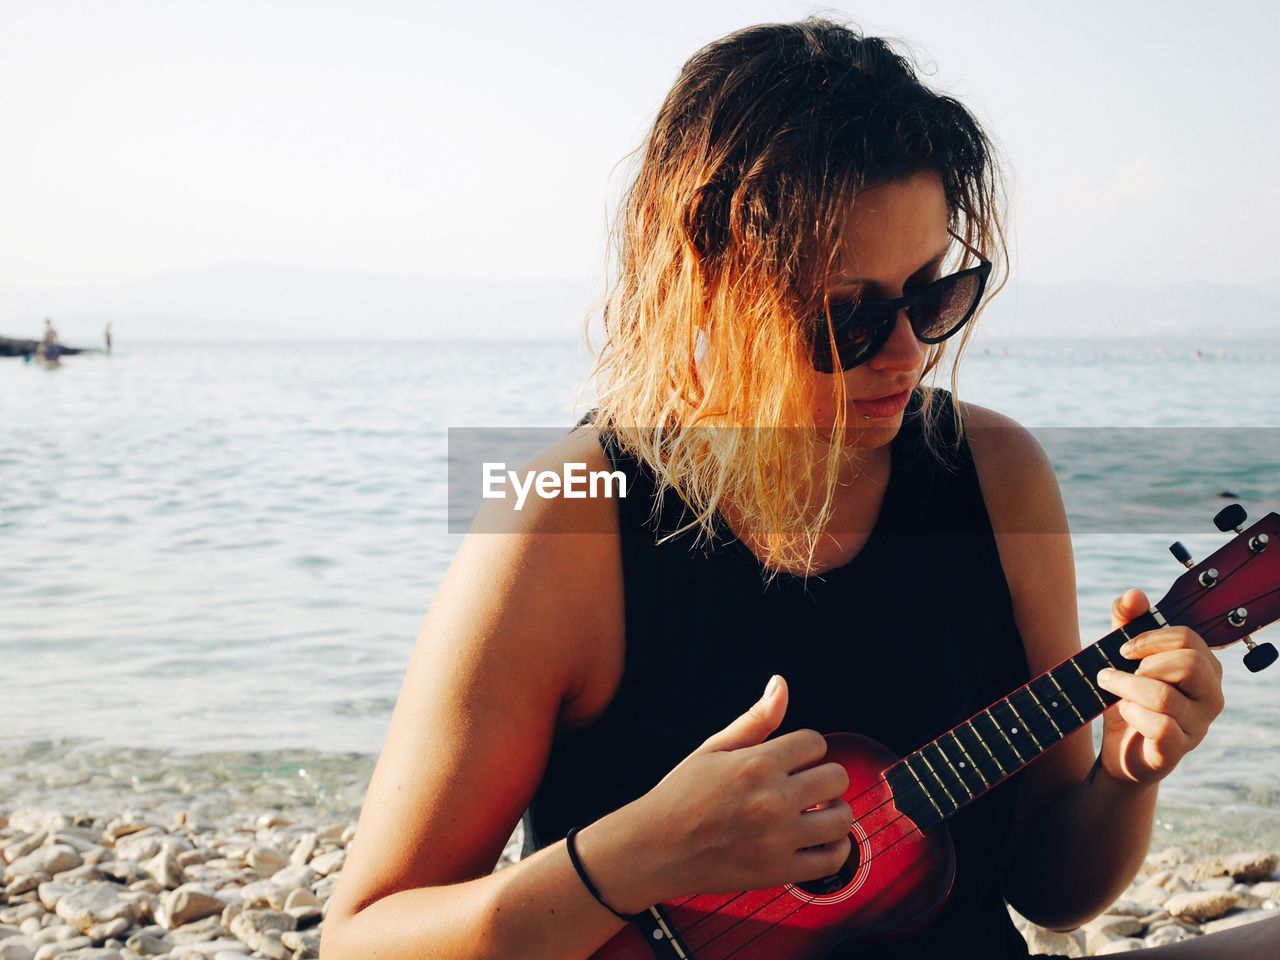 Woman playing guitar at beach against sky